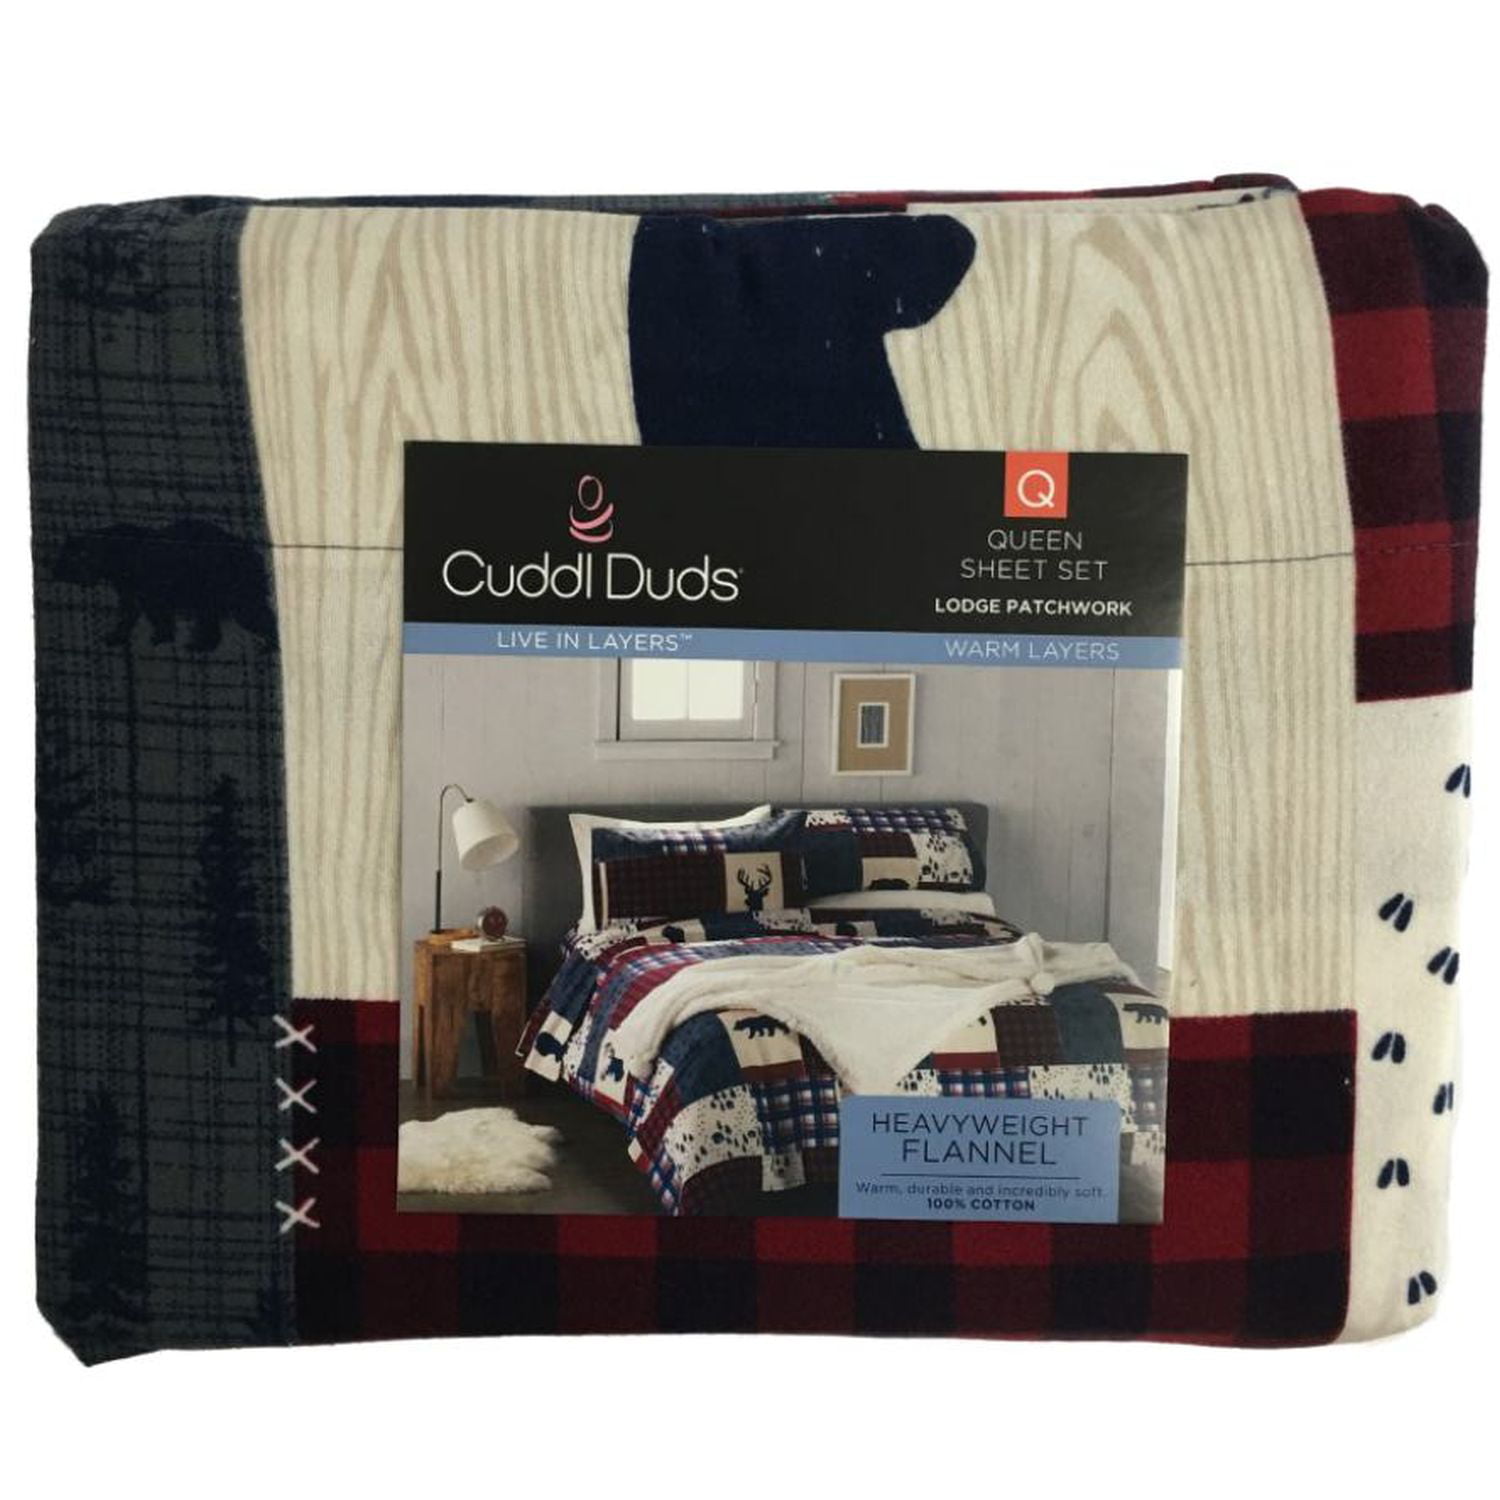 FREE SHIPPING Cuddl Duds Queen Heavy Weight Flannel Sheet Set Blue Lodge 